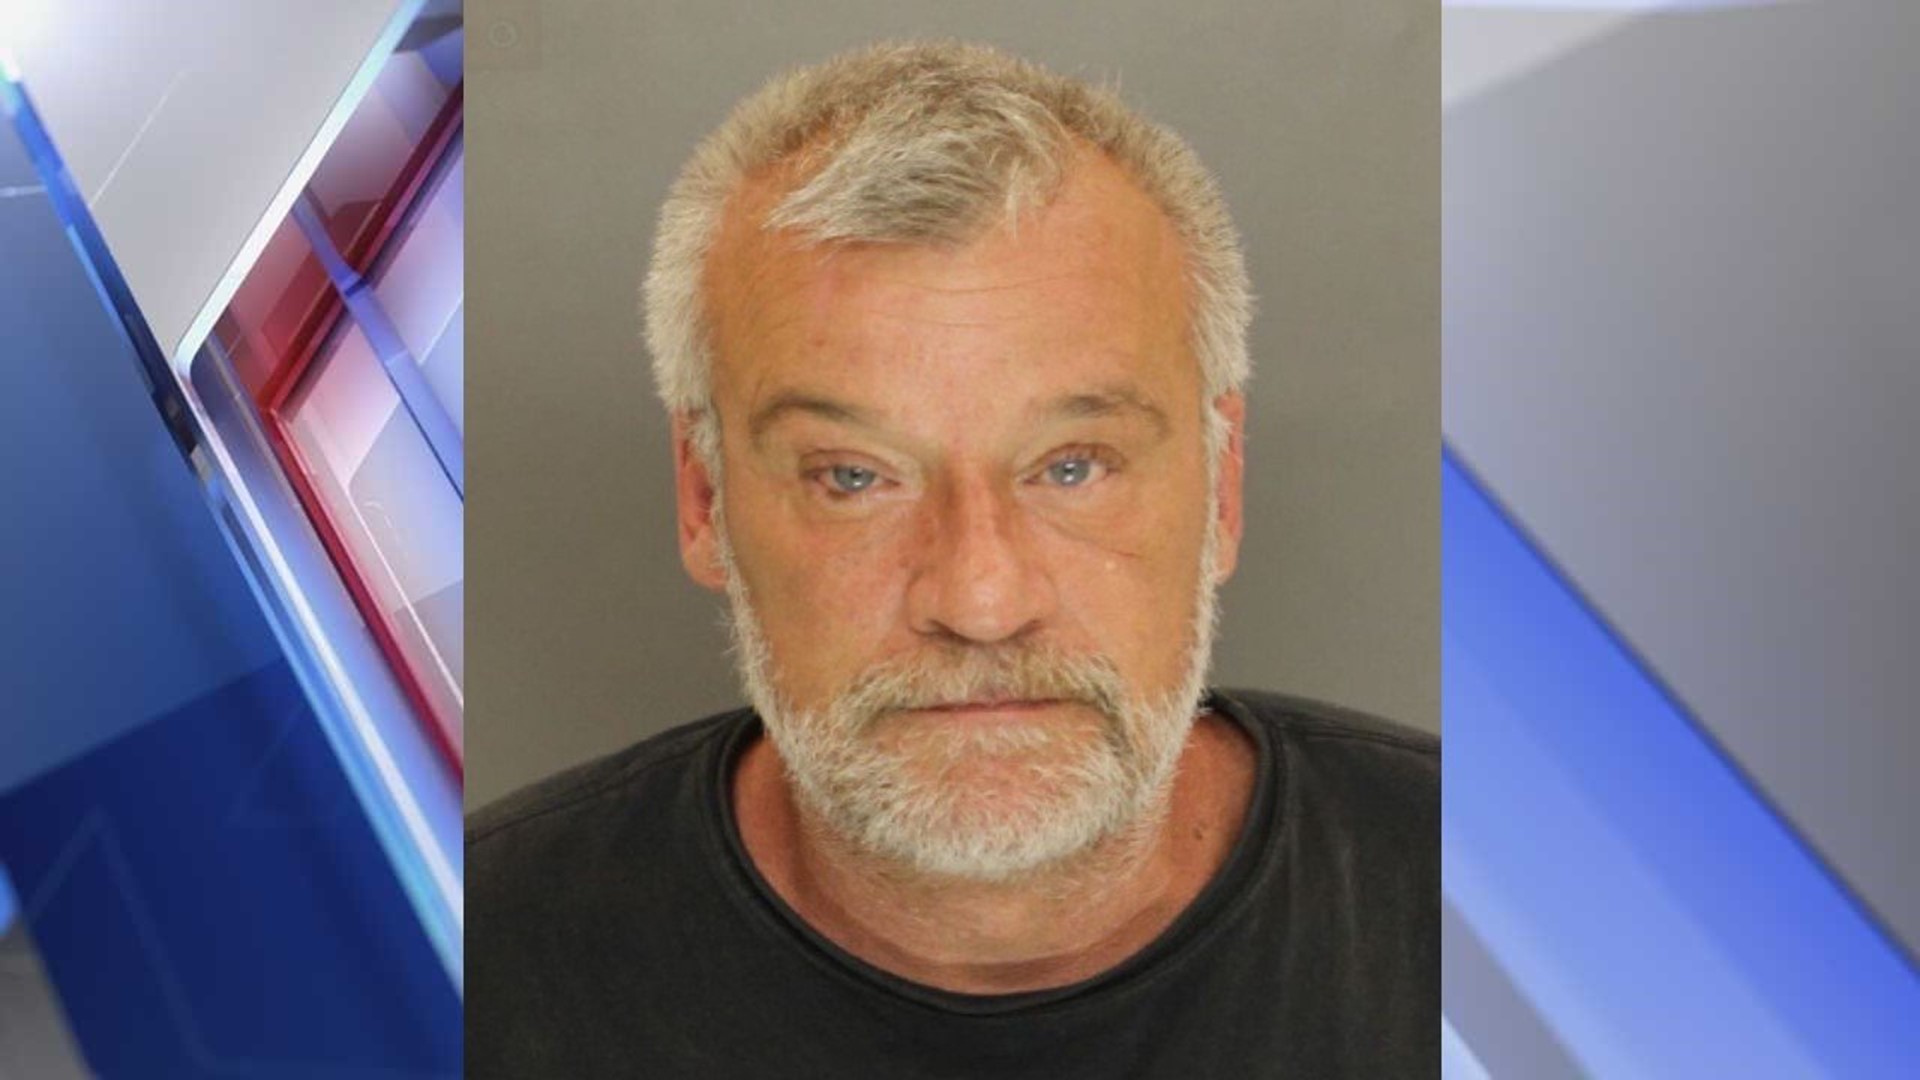 York County man arrested for DUI for the 7th time, police say